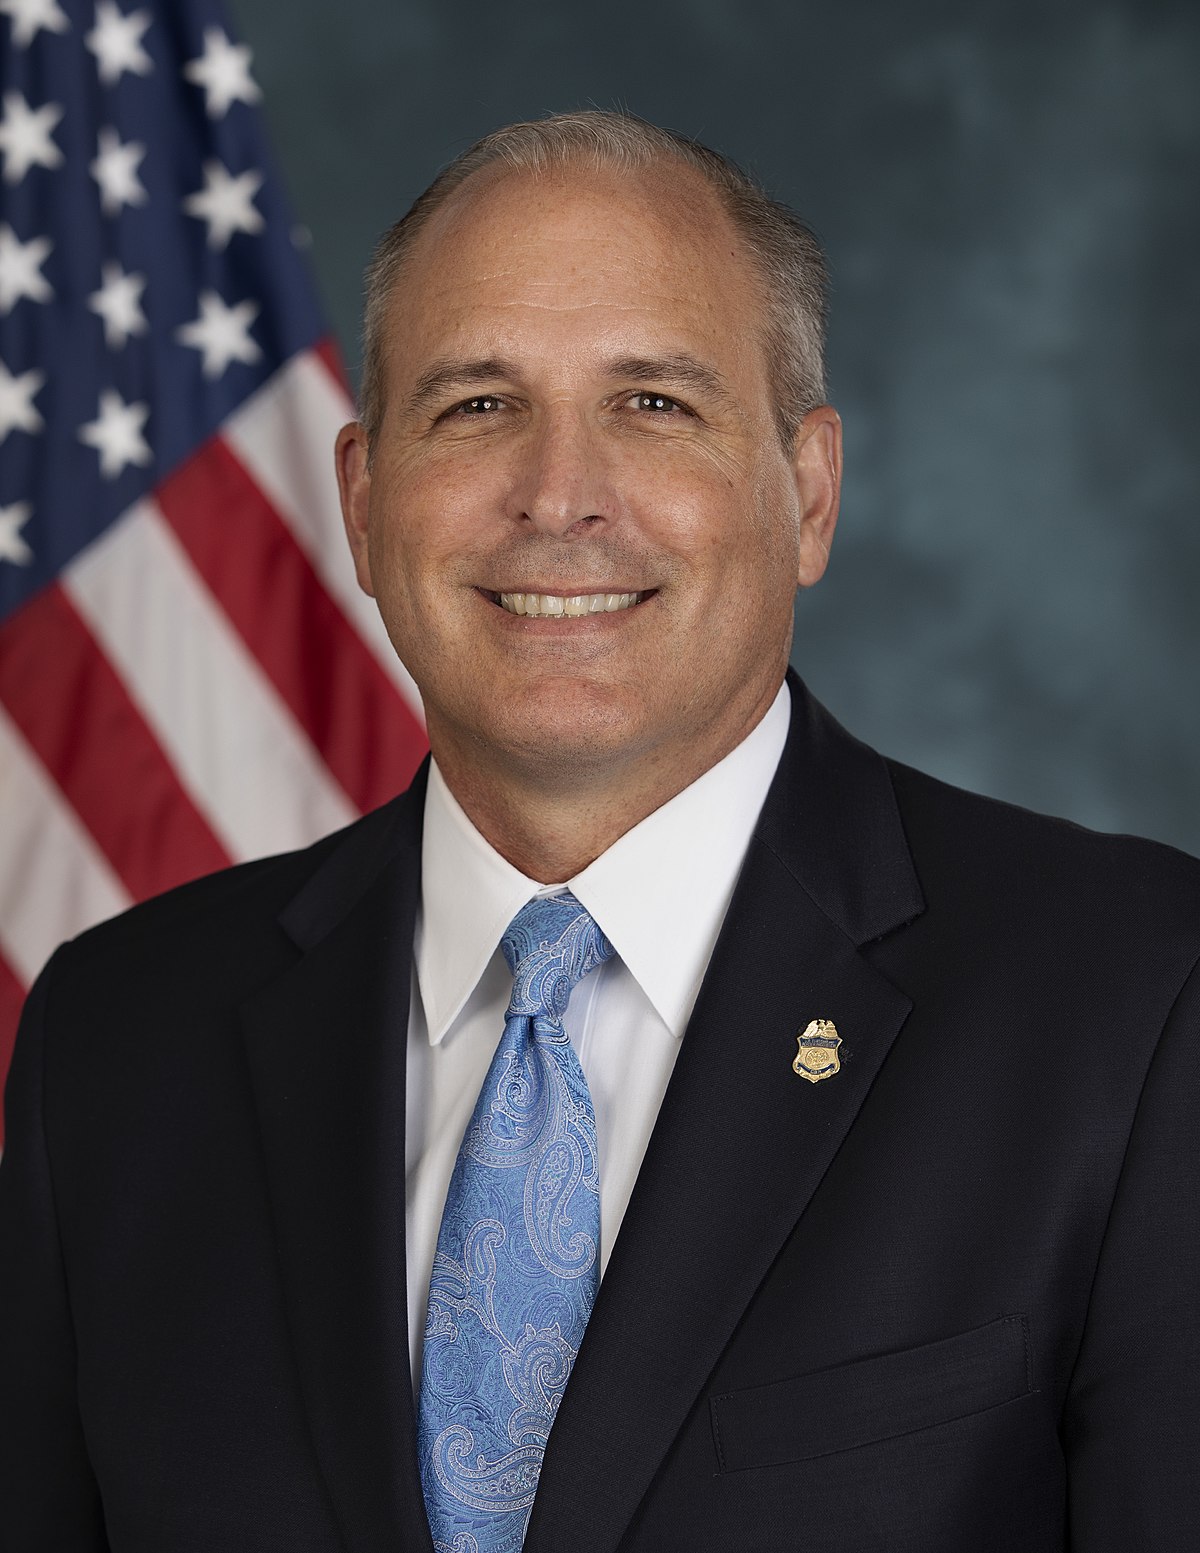 Official Portrait of U.S. Customs and Border Protection, Acting Commissioner Mark A. Morgan taken at CBP Headquarters in Washington, D.C. on July 9, 2019..Photographer: Donna Burton